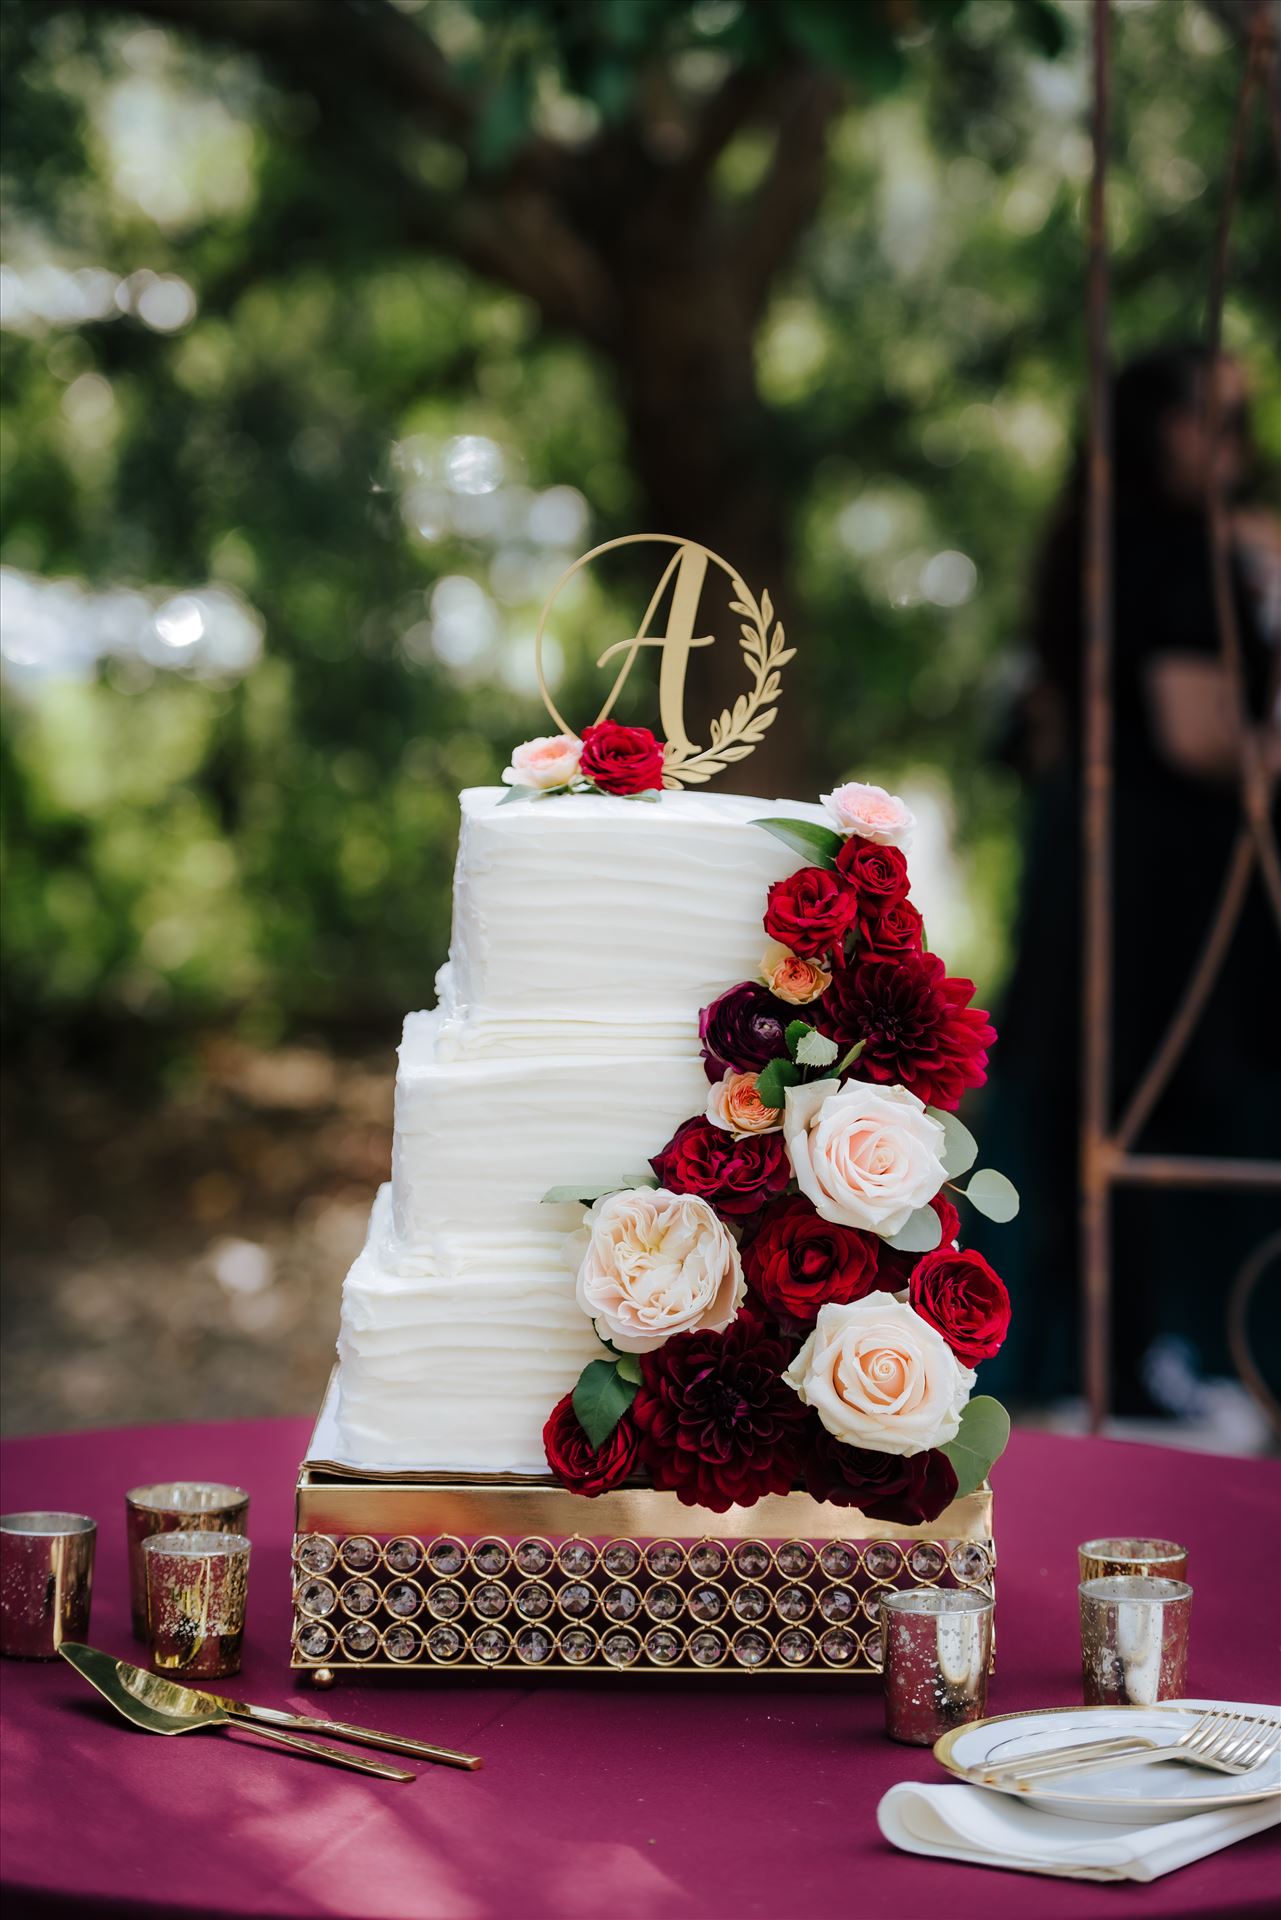 Final-6186.JPG - Mirror's Edge Photography, San Luis Obispo Wedding Photographer, captures The Audettes at The Gardens and Peacock Farms in Arroyo Grande, California.  Amazing wedding cake with roses by Sarah Williams